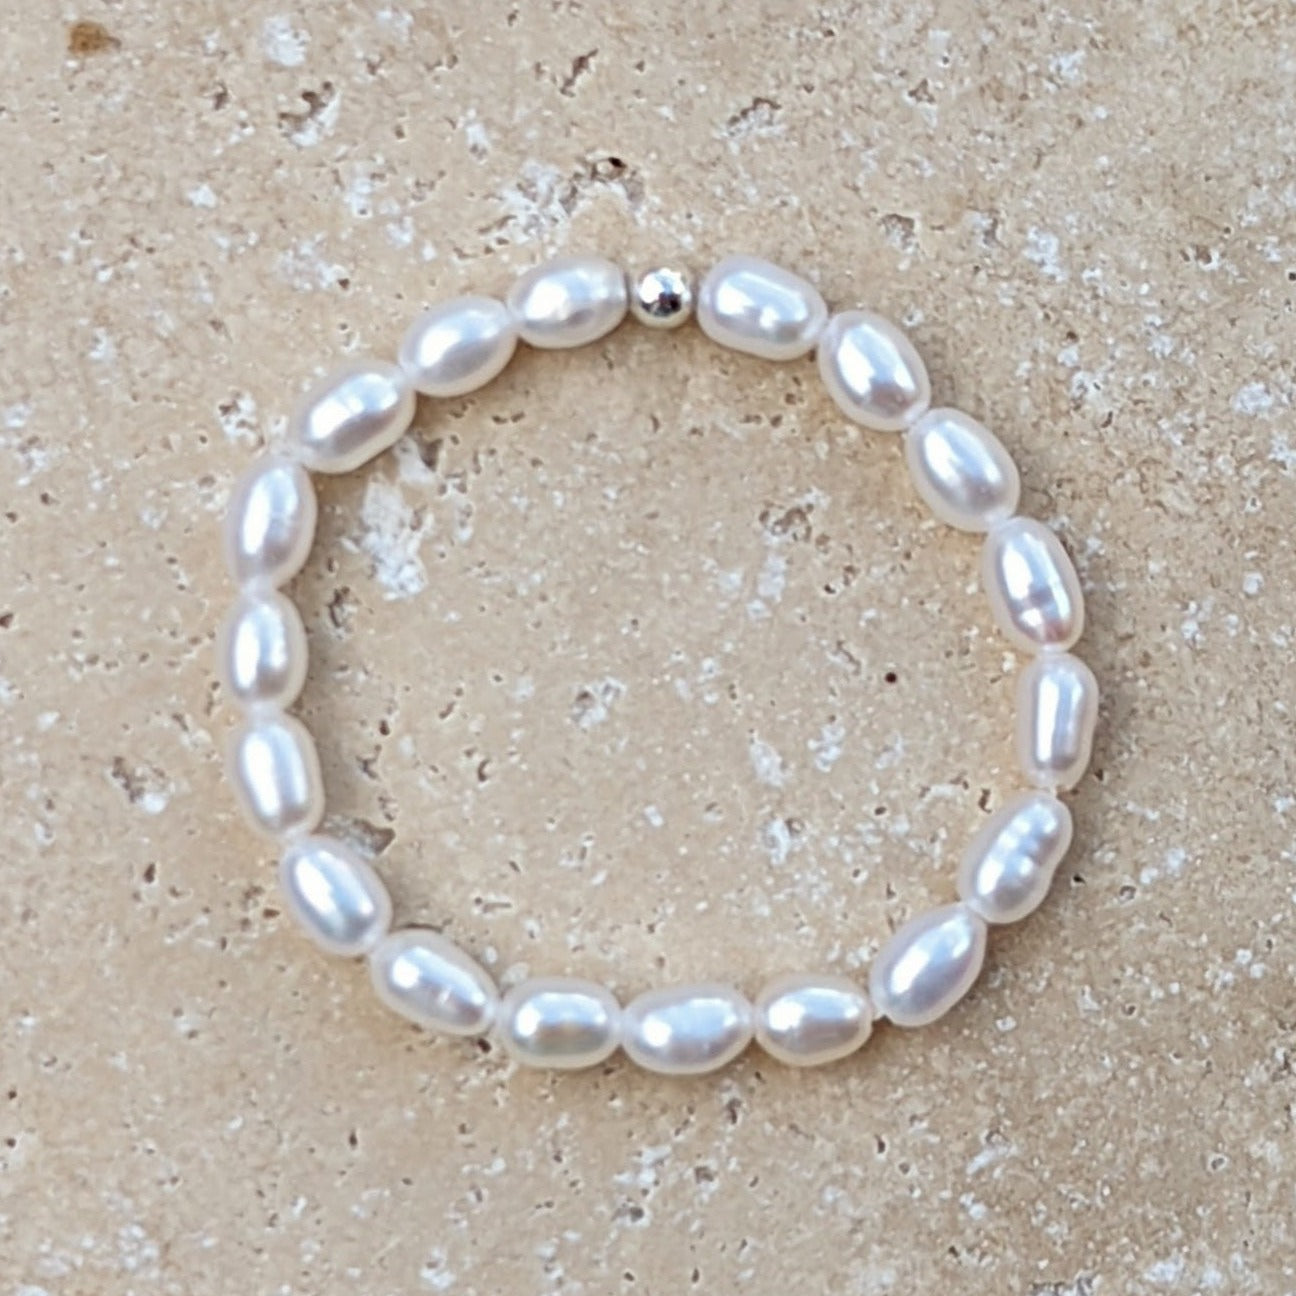 Tiny pearl ring with single silver bead